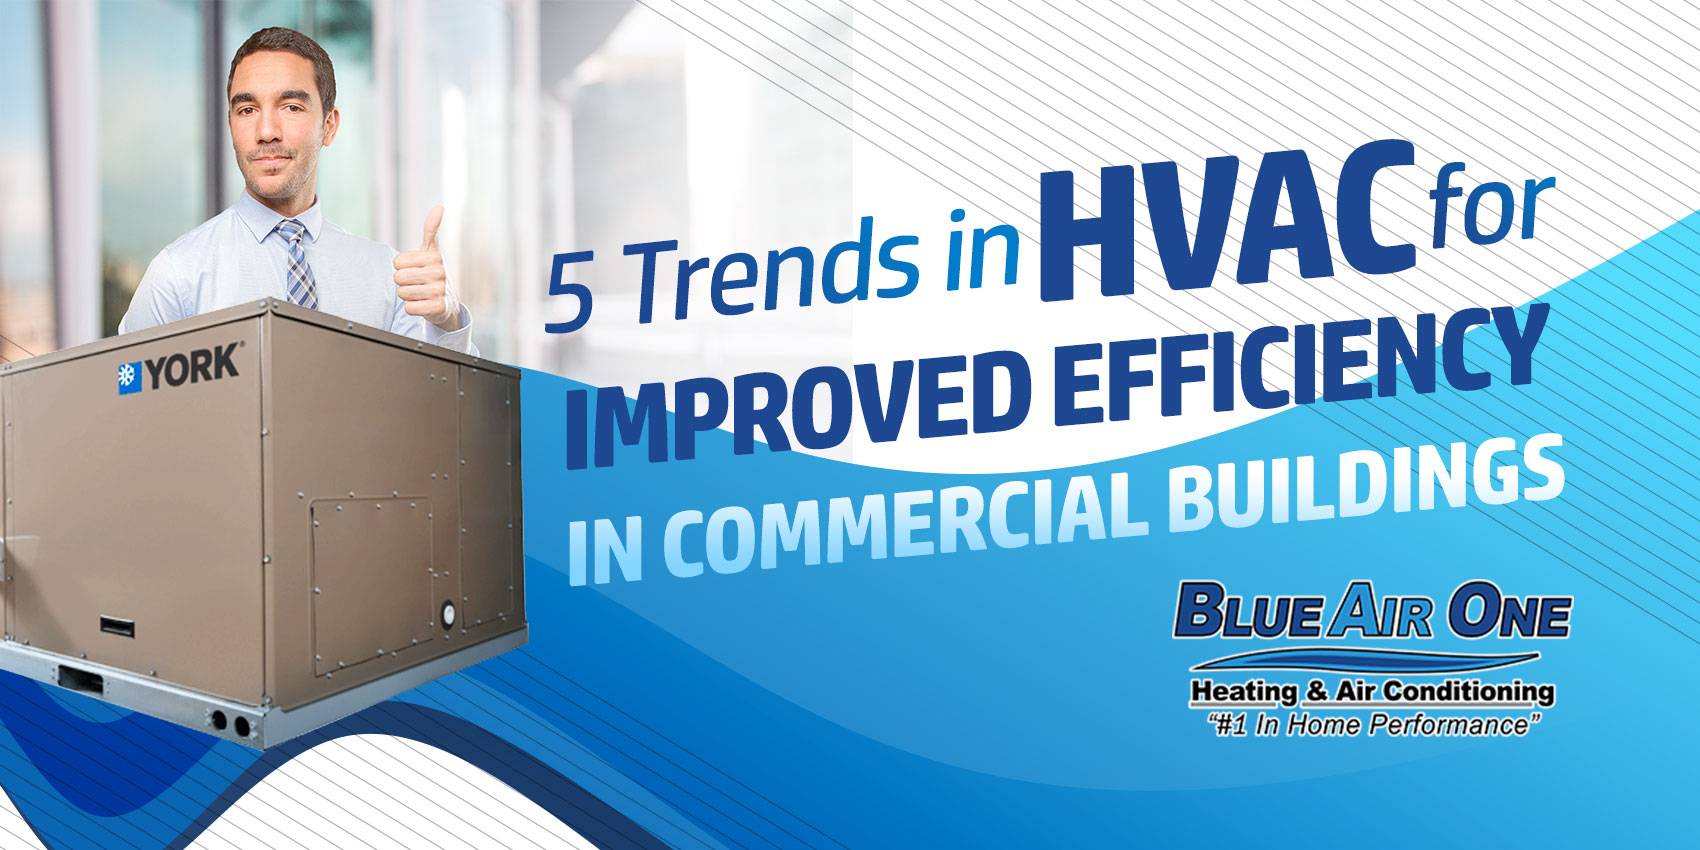 5 Trends in HVAC for Improved Efficiency in Commercial Buildings